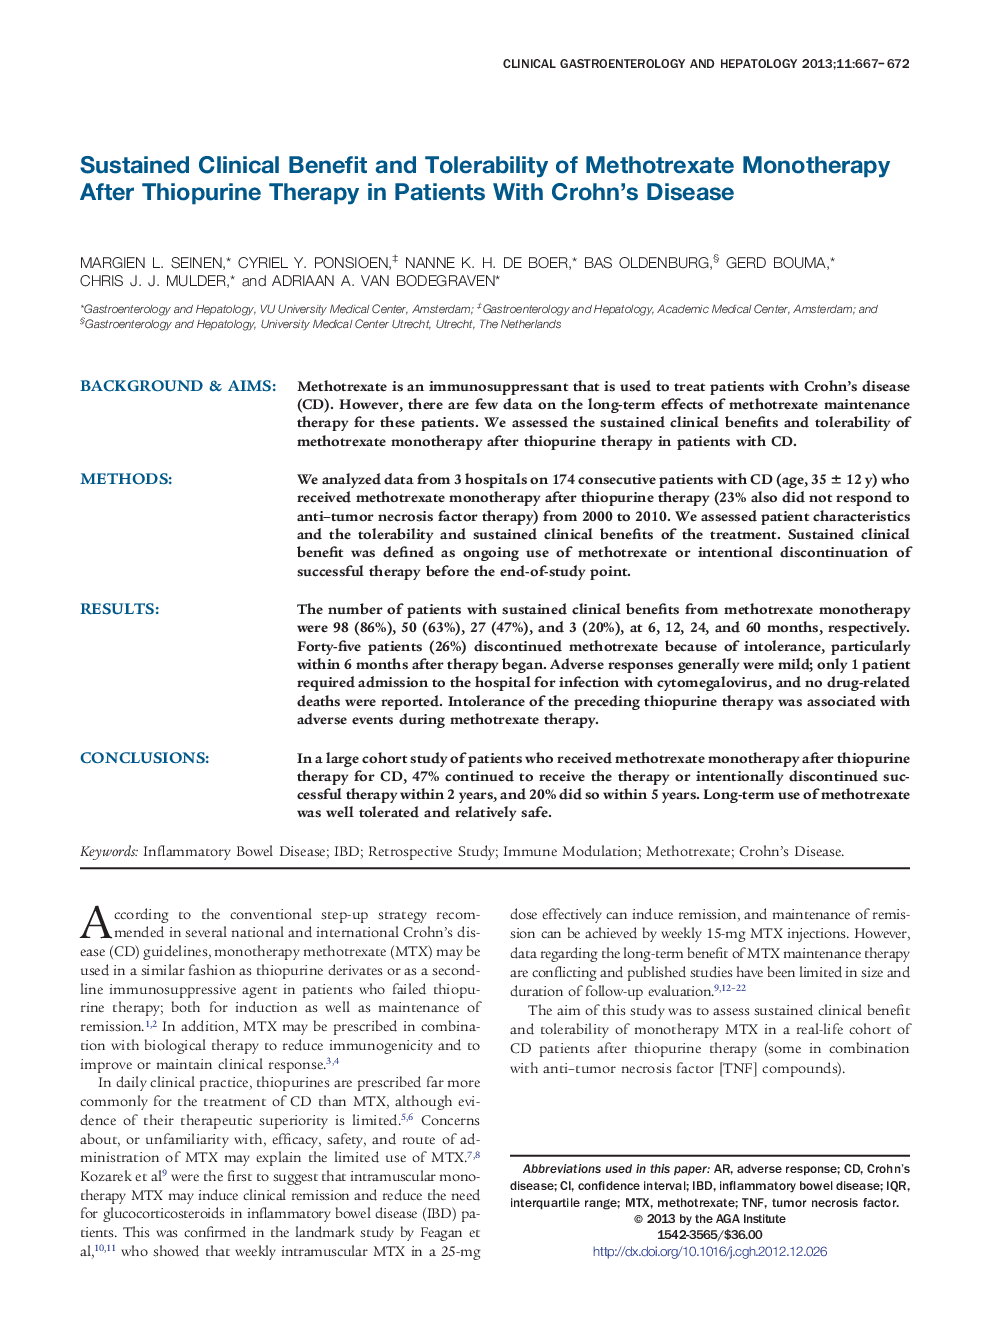 Sustained Clinical Benefit and Tolerability of Methotrexate Monotherapy After Thiopurine Therapy in Patients With Crohn's Disease